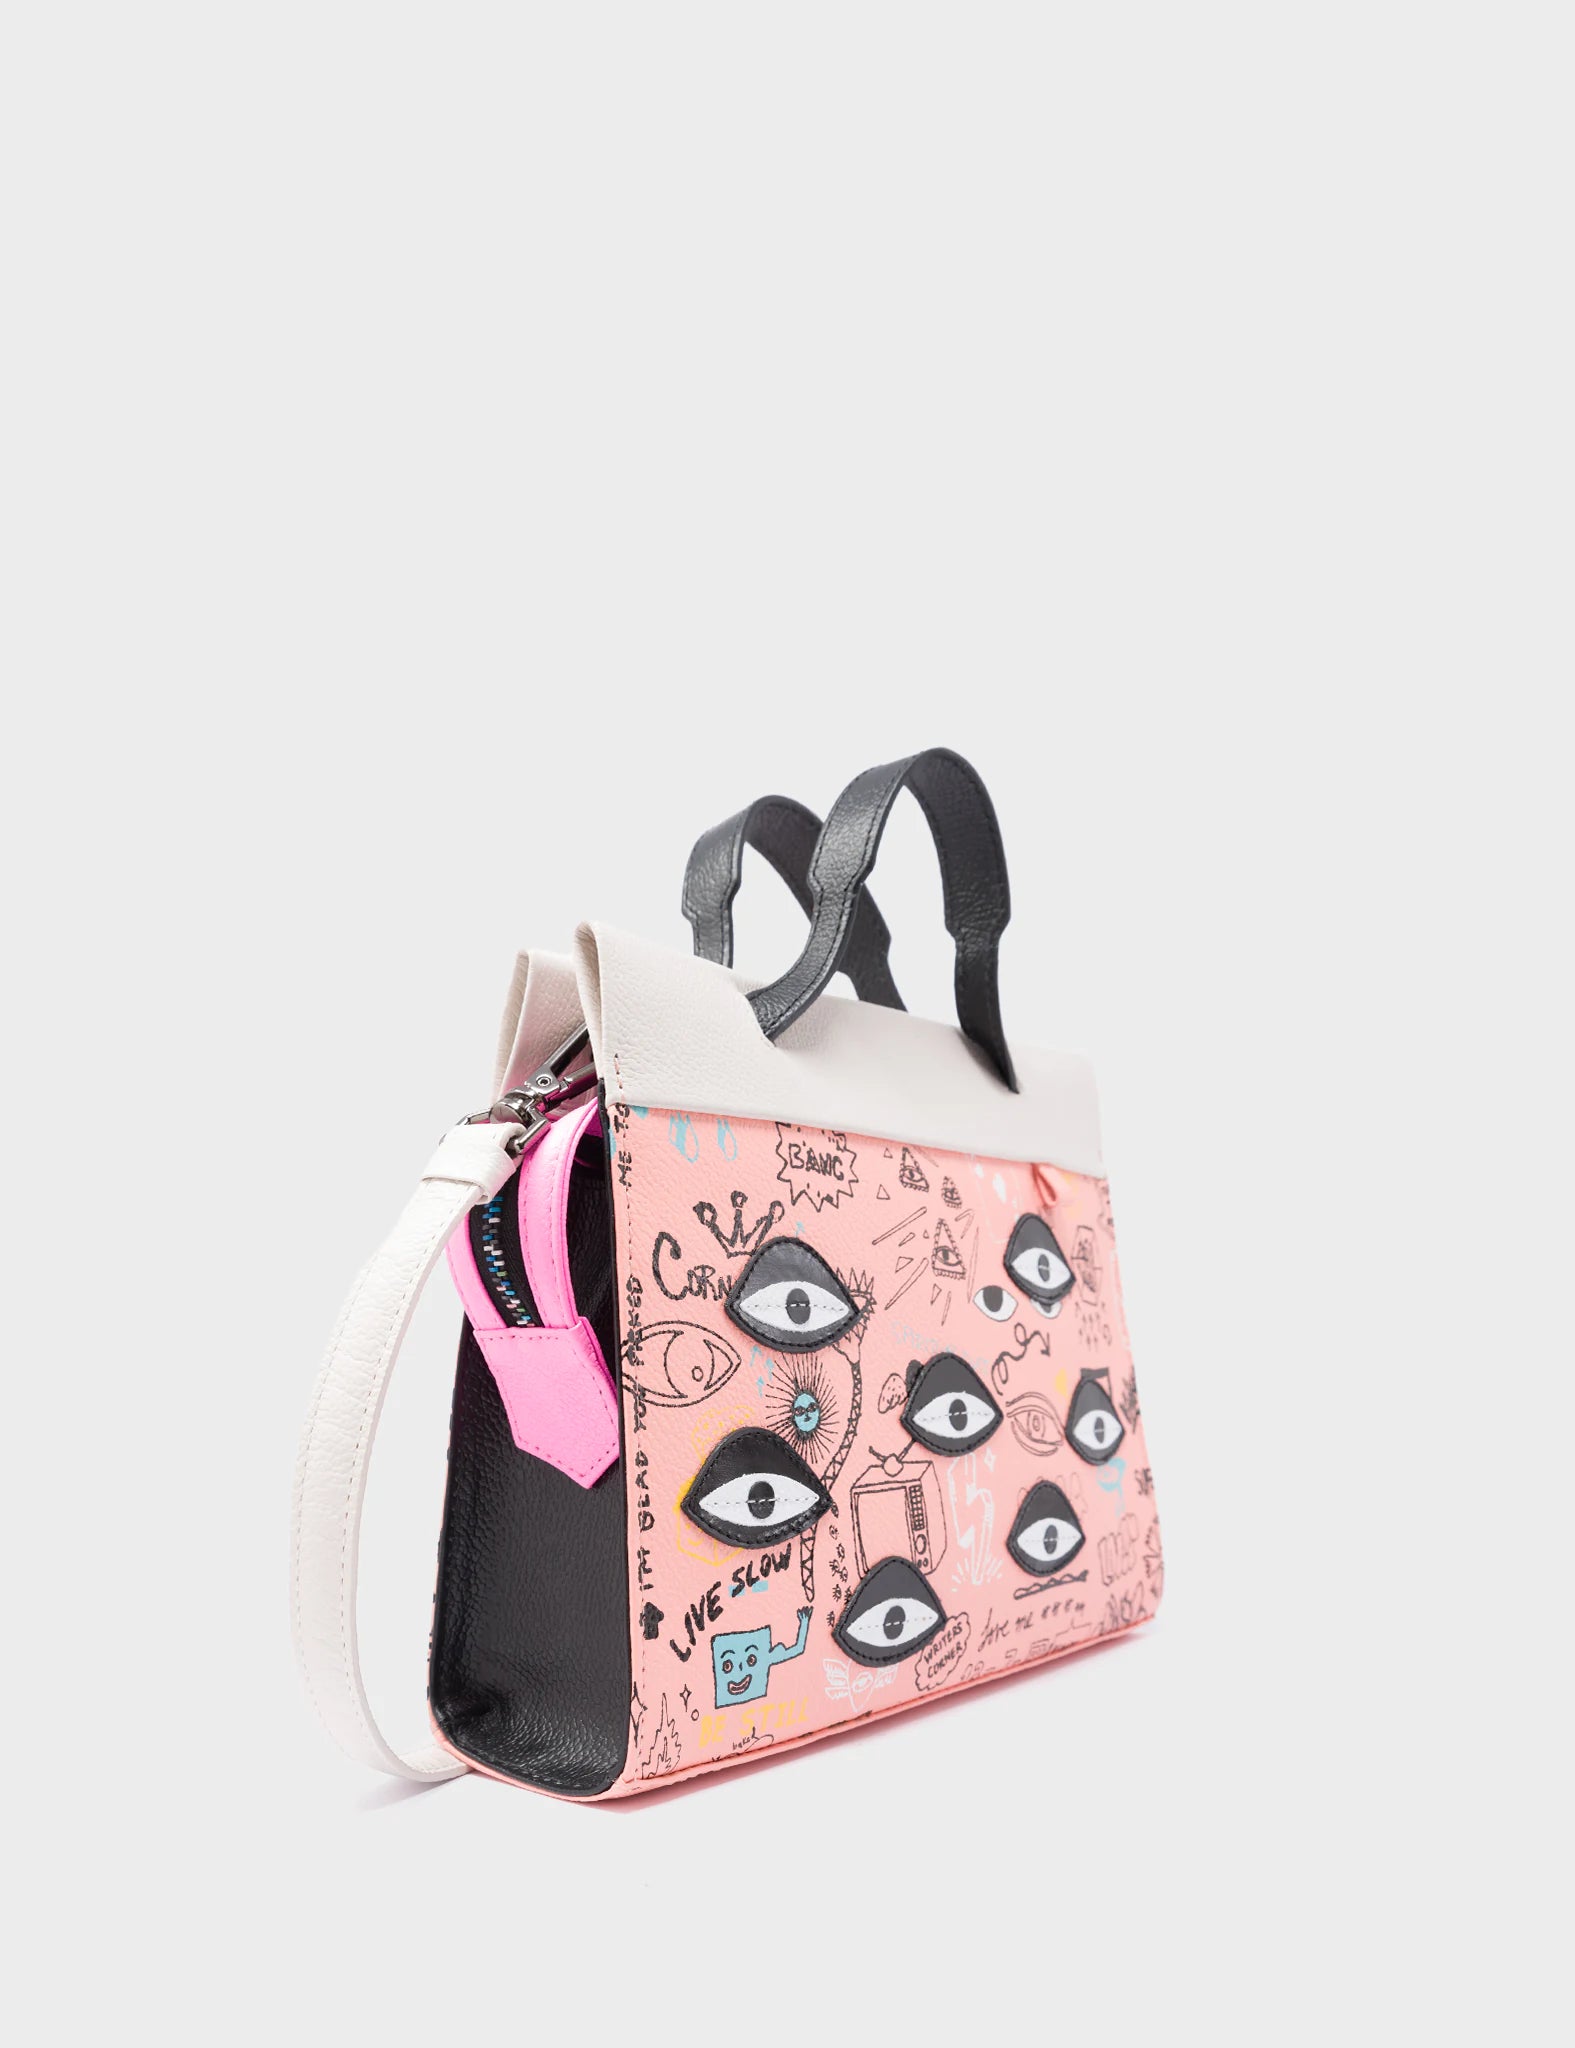 Vali Crossbody Small Rosa Leather Bag - Urban Doodles Print and Eyes Applique - Side Corner View